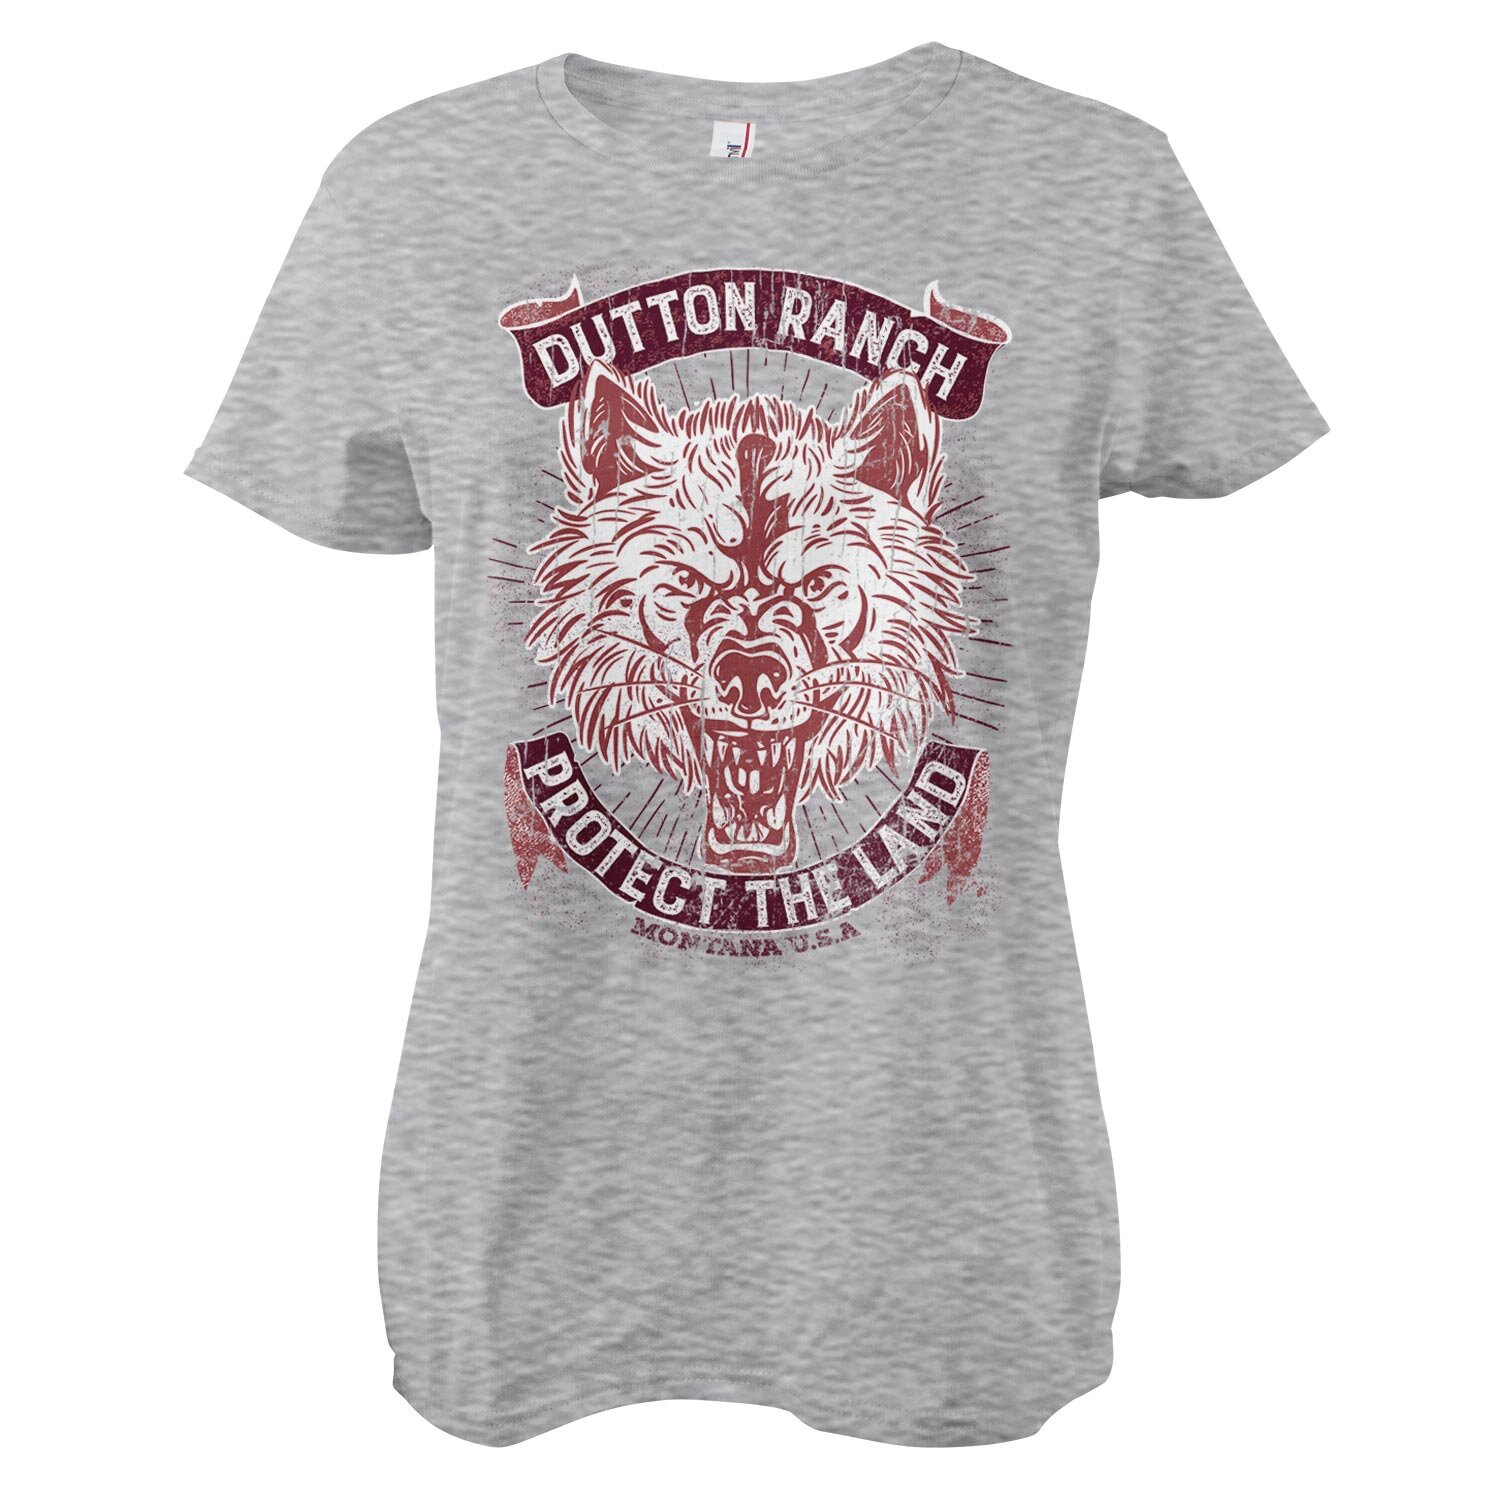 Dutton Ranch - Protect The Land Girly Tee